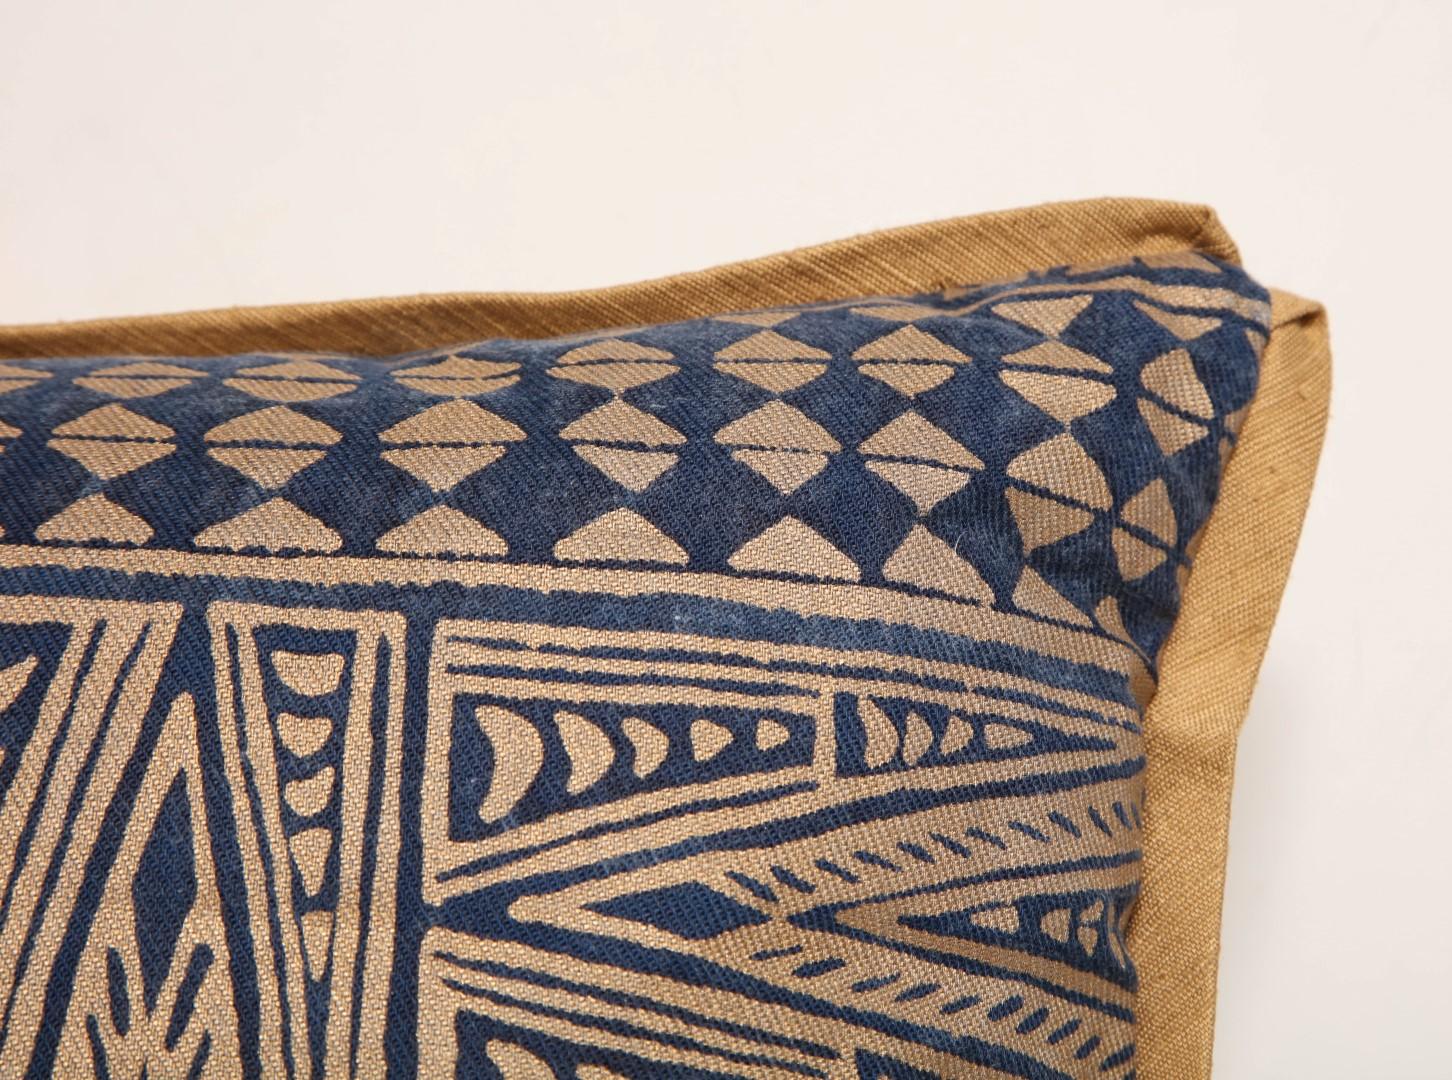 Cotton Pair of Fortuny Fabric Cushions in the Melilla Pattern 